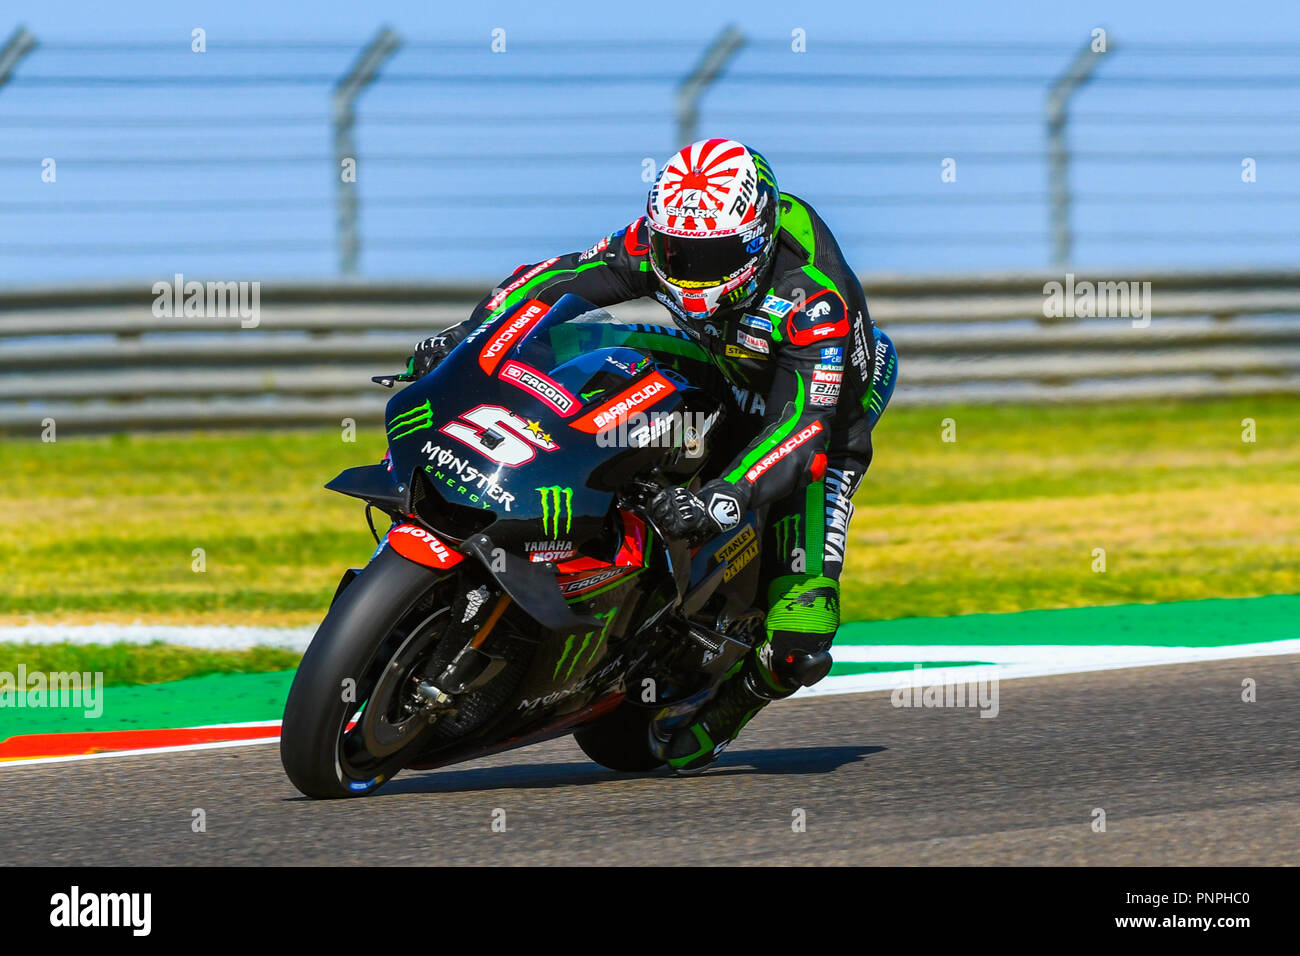 JOHANN ZARCO (5) of France and Monster Yamaha Tech 3 during the MOTO GP  Free Practice